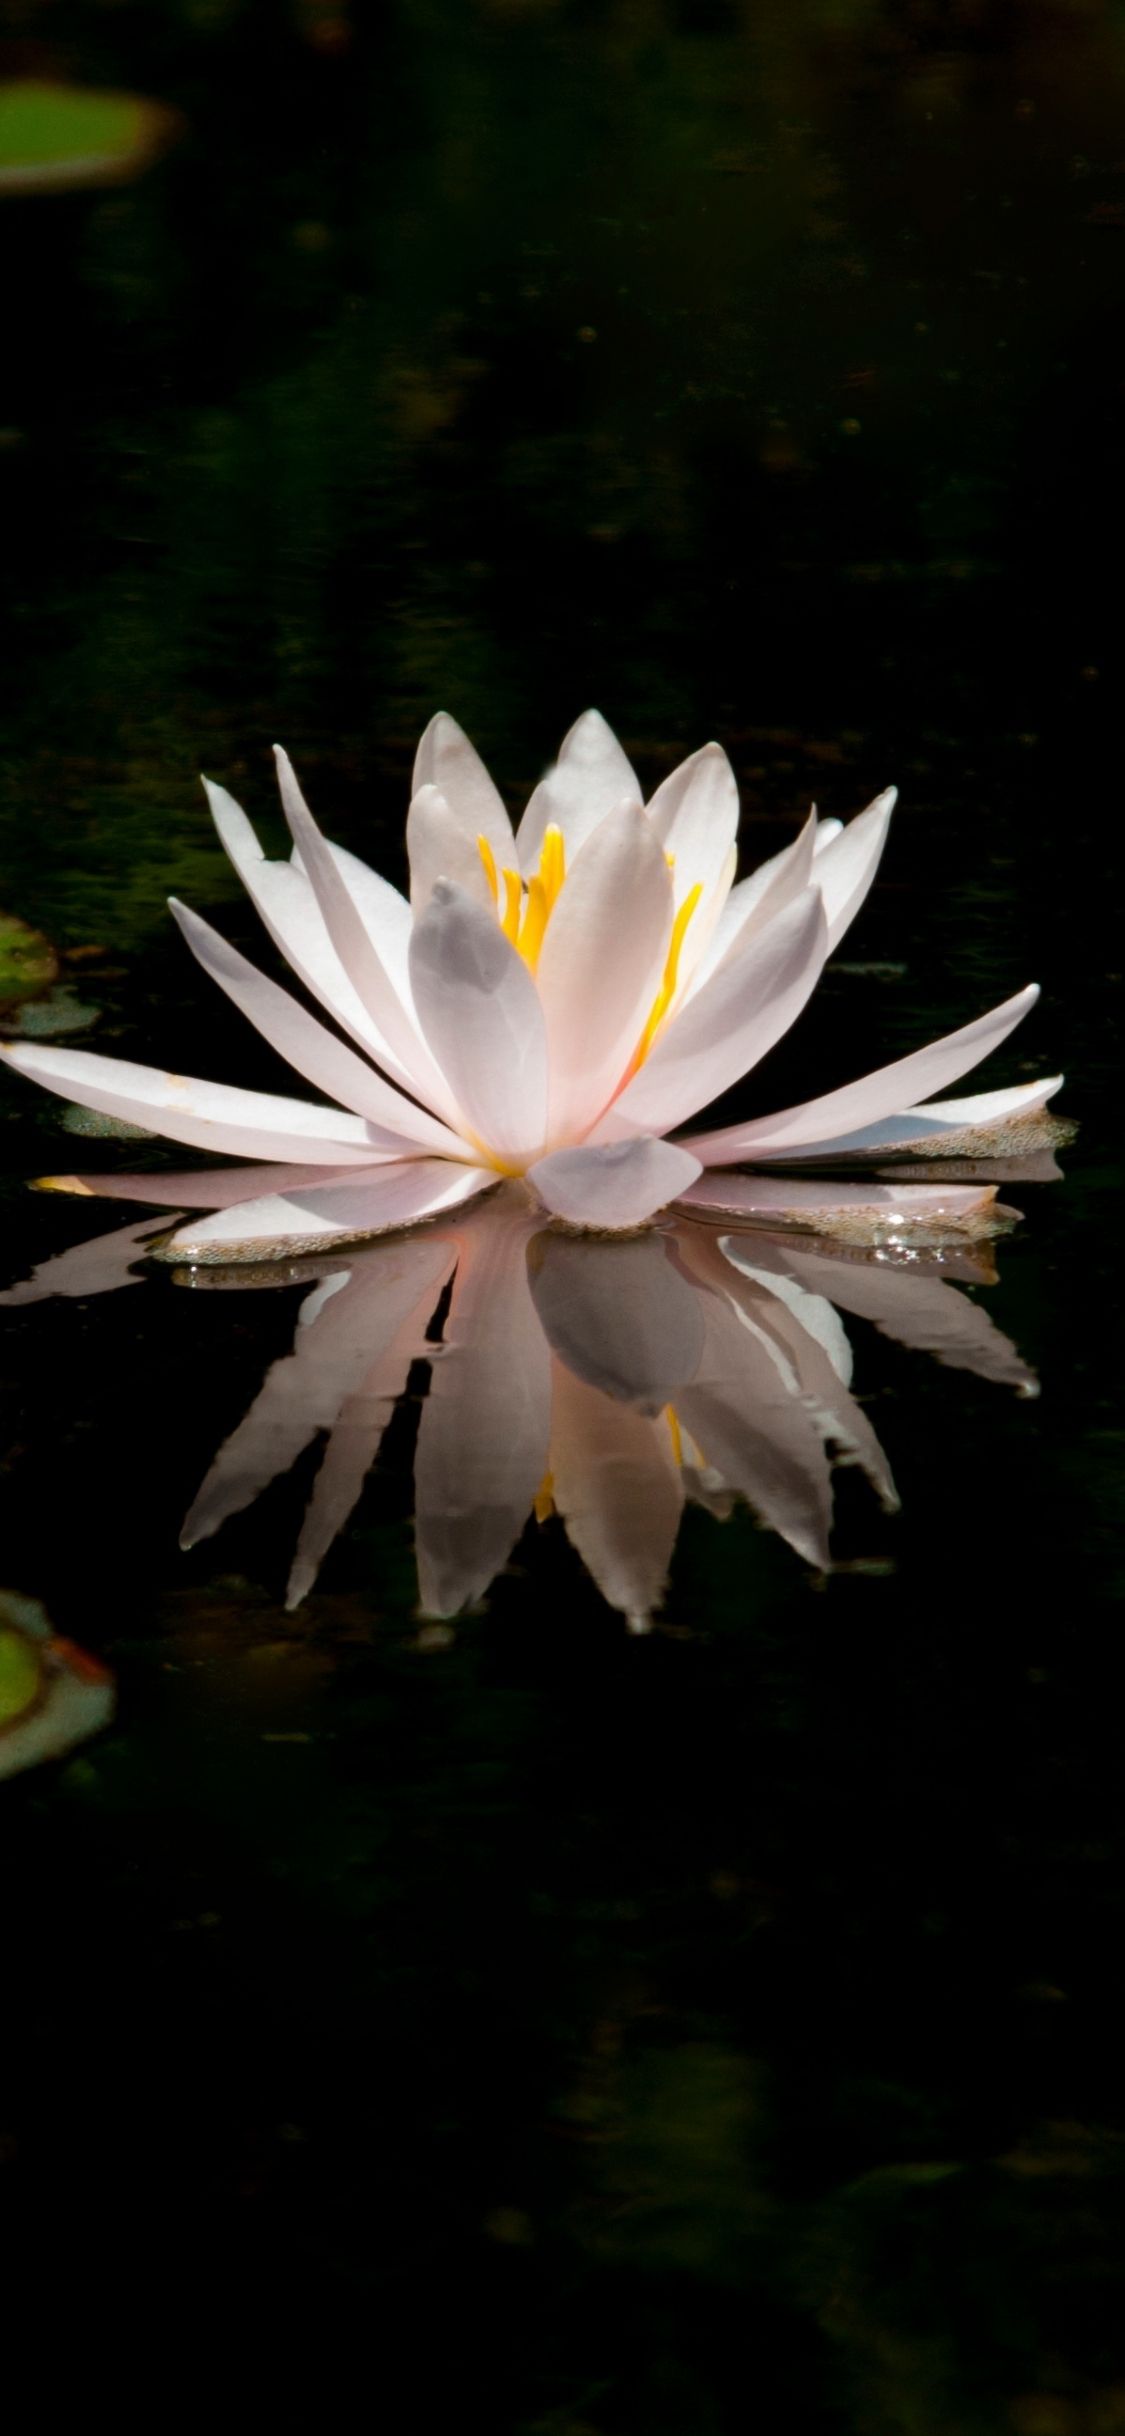 Download 1125x2436 wallpaper white, reflections, water lily, lake, flower, iphone x 1125x2436 HD image, background, 4982